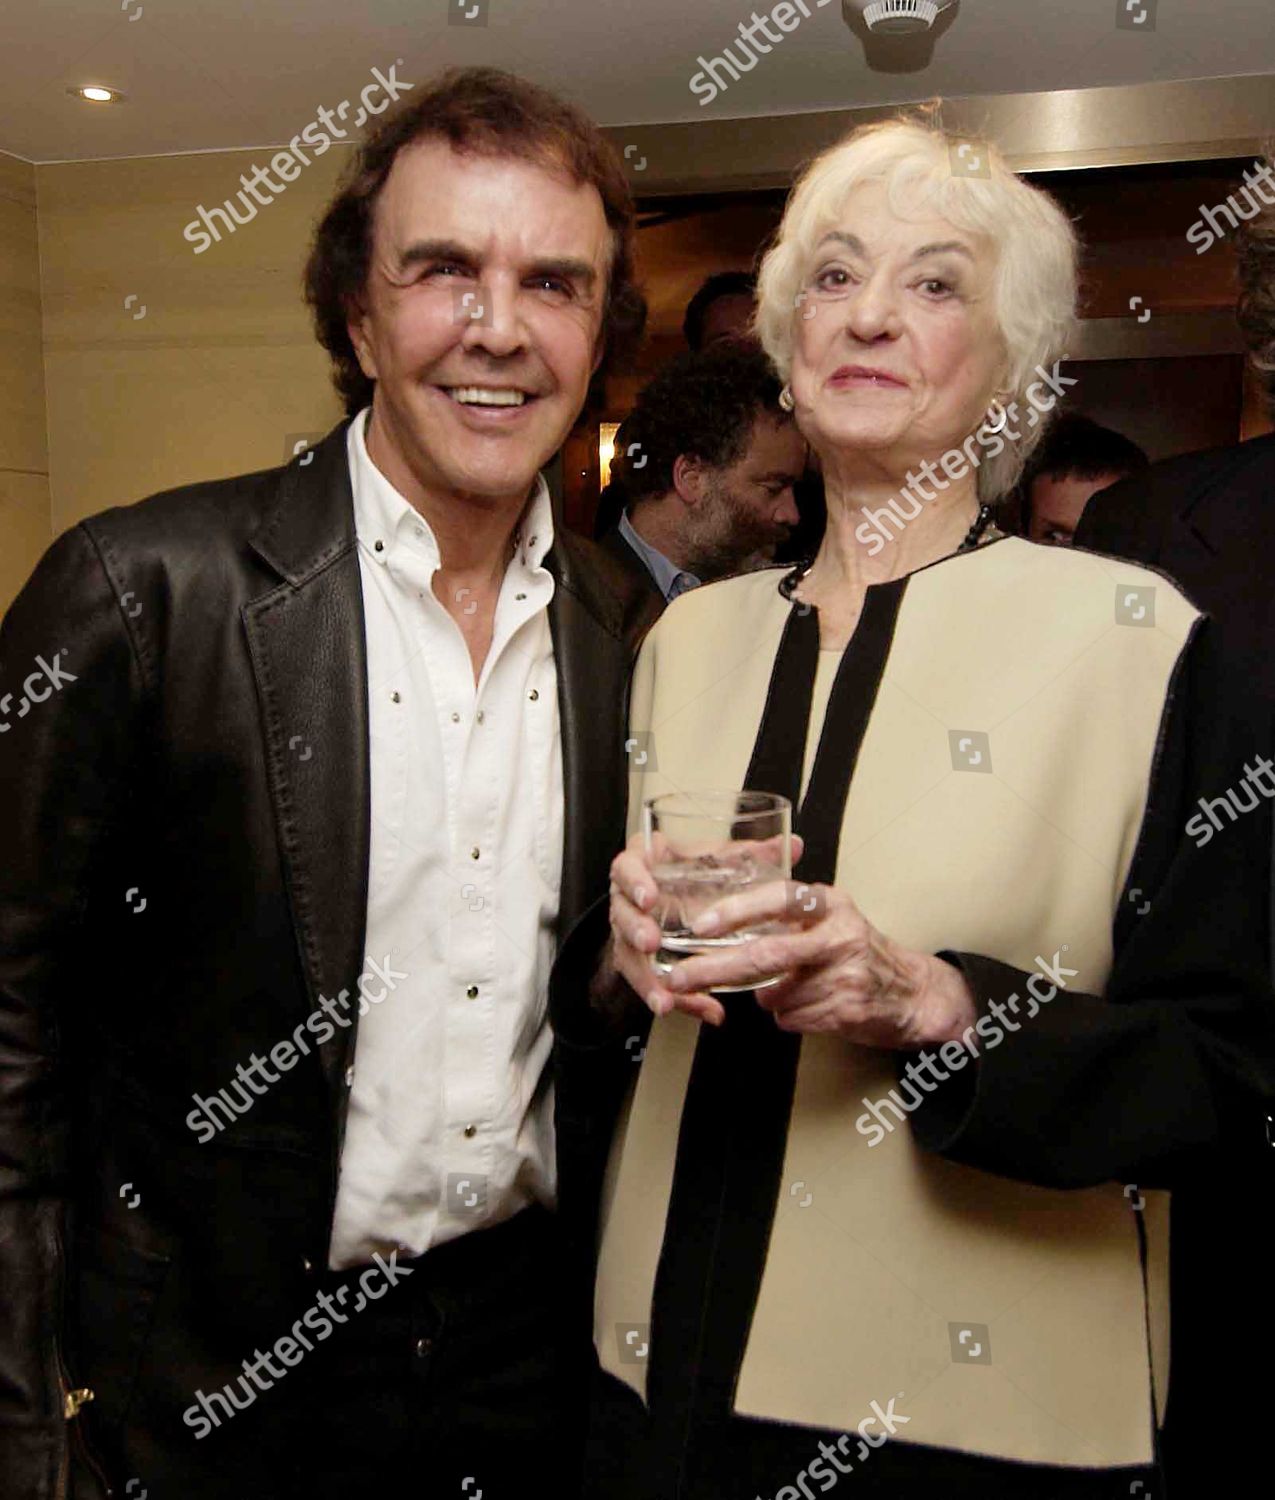 Unlikely celebrities pictured together - Page 3 Bea-arthur-at-the-savoy-first-night-afterparty-at-the-athenaeum-hotel-london-on15-sep-2003-shutterstock-editorial-9190523h